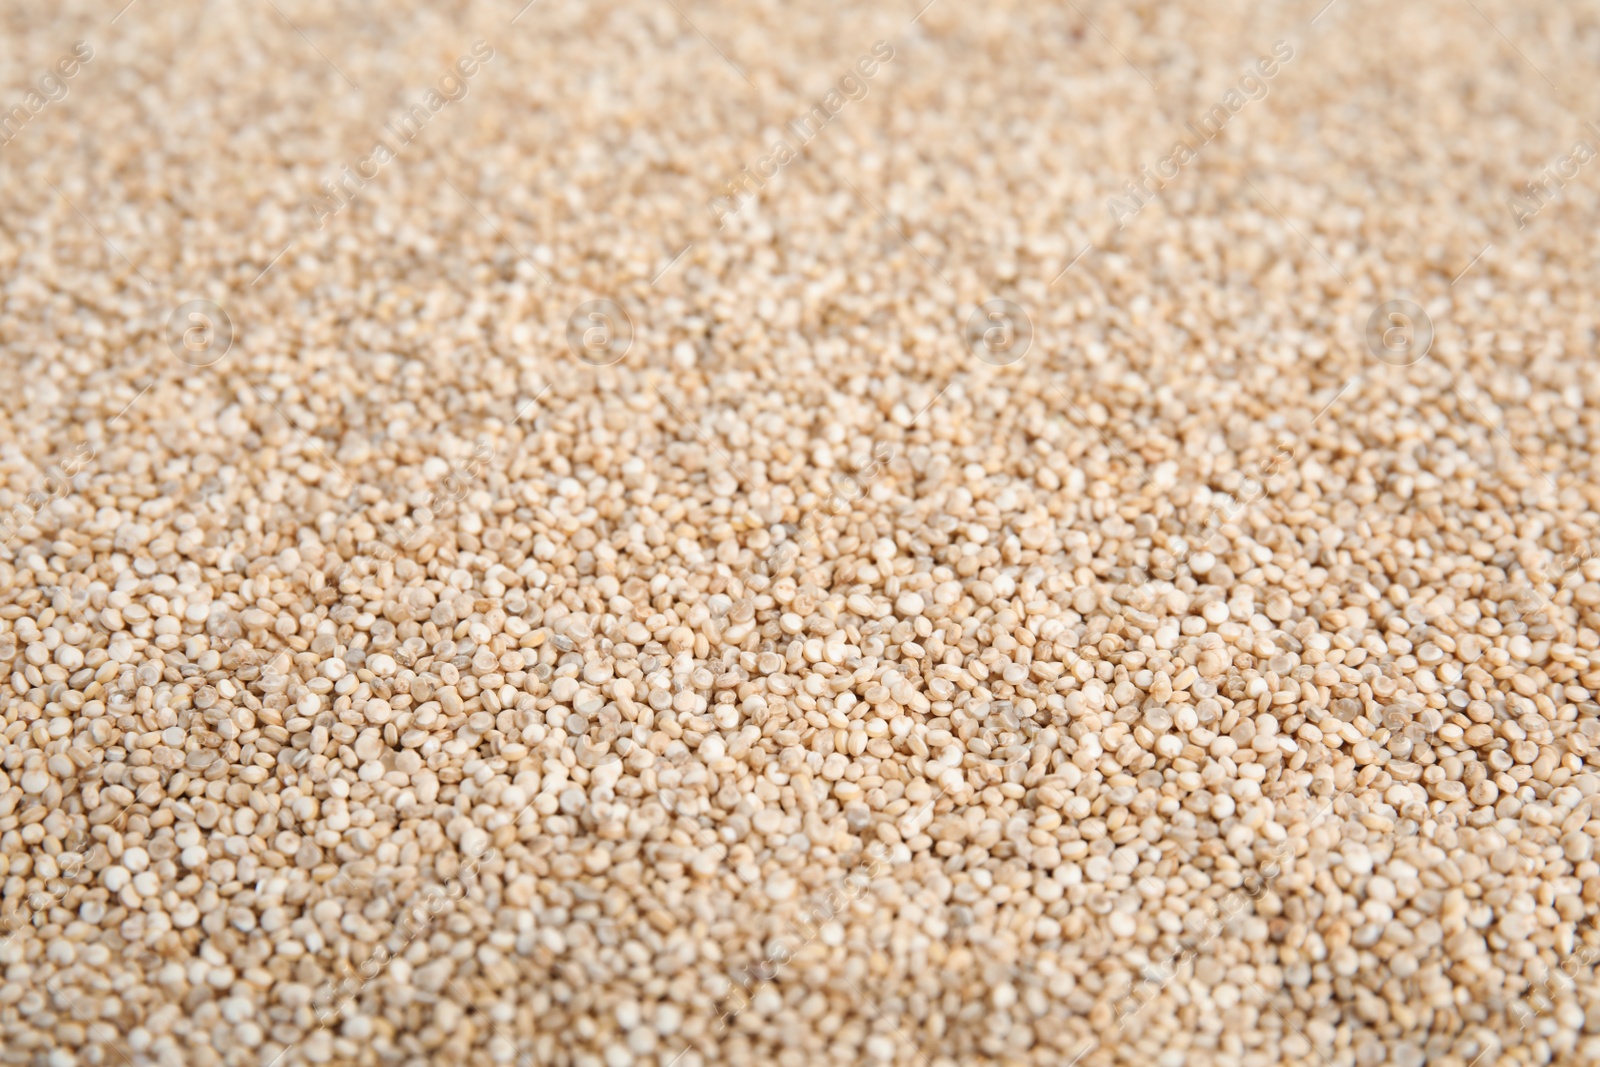 Photo of Pile of uncooked white quinoa as background, closeup